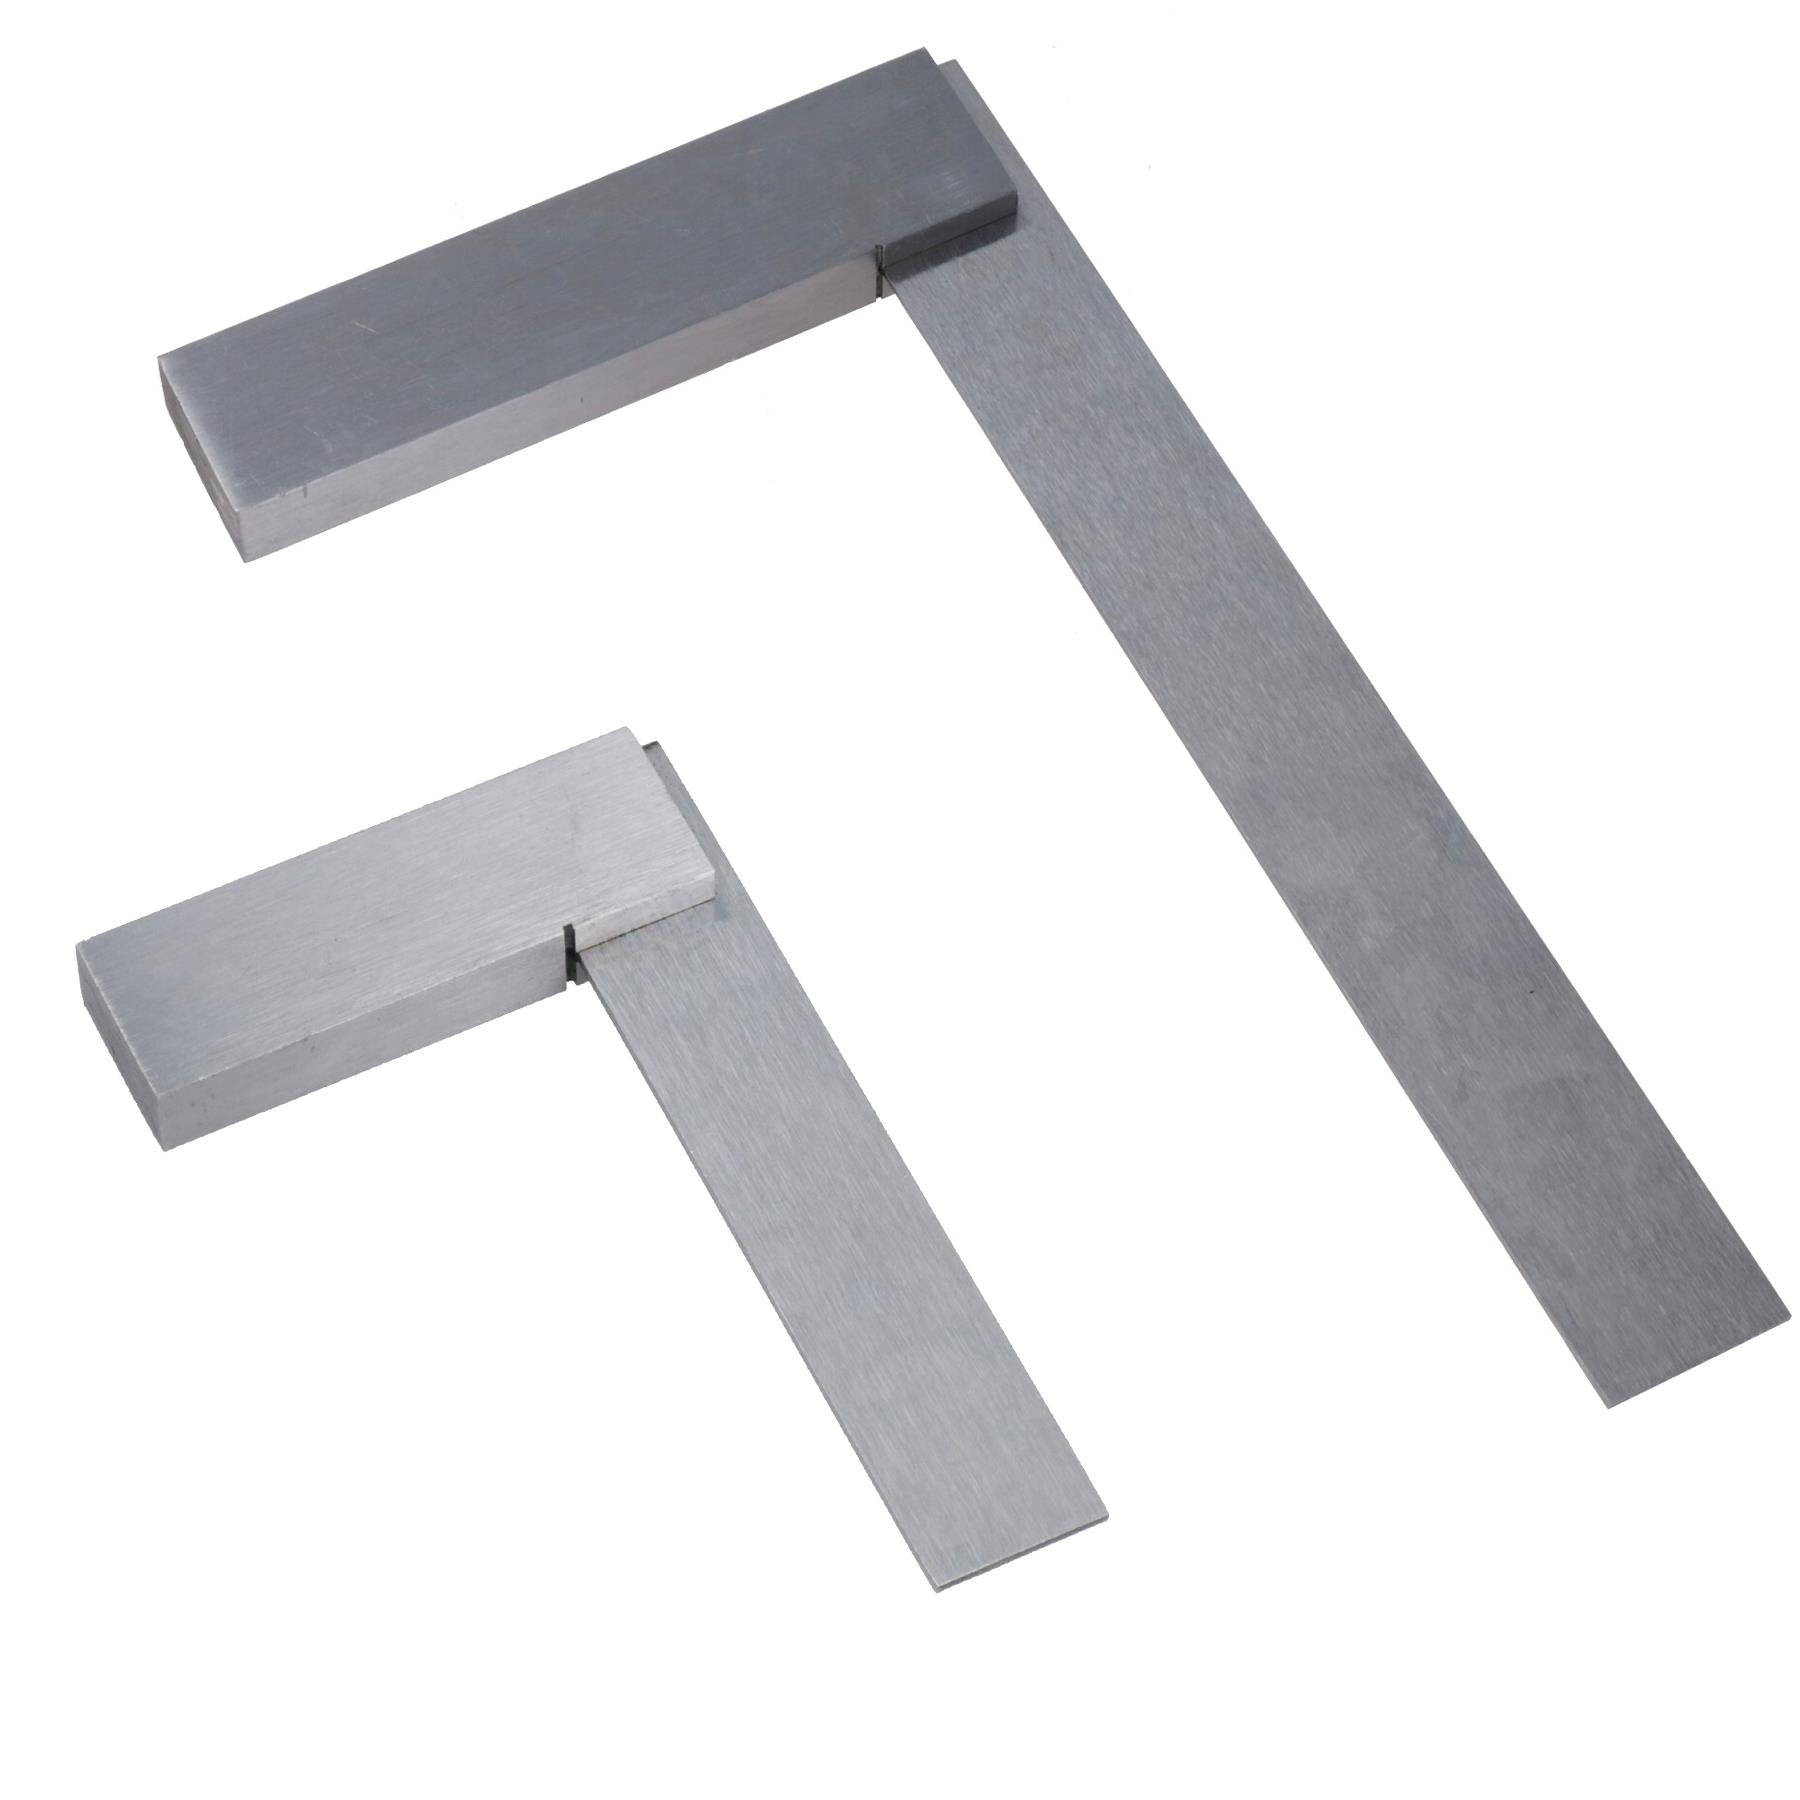 3 + 8 Inch 75 / 200mm Engineer Tri Set Square Right Angle Straight Edge Stainless